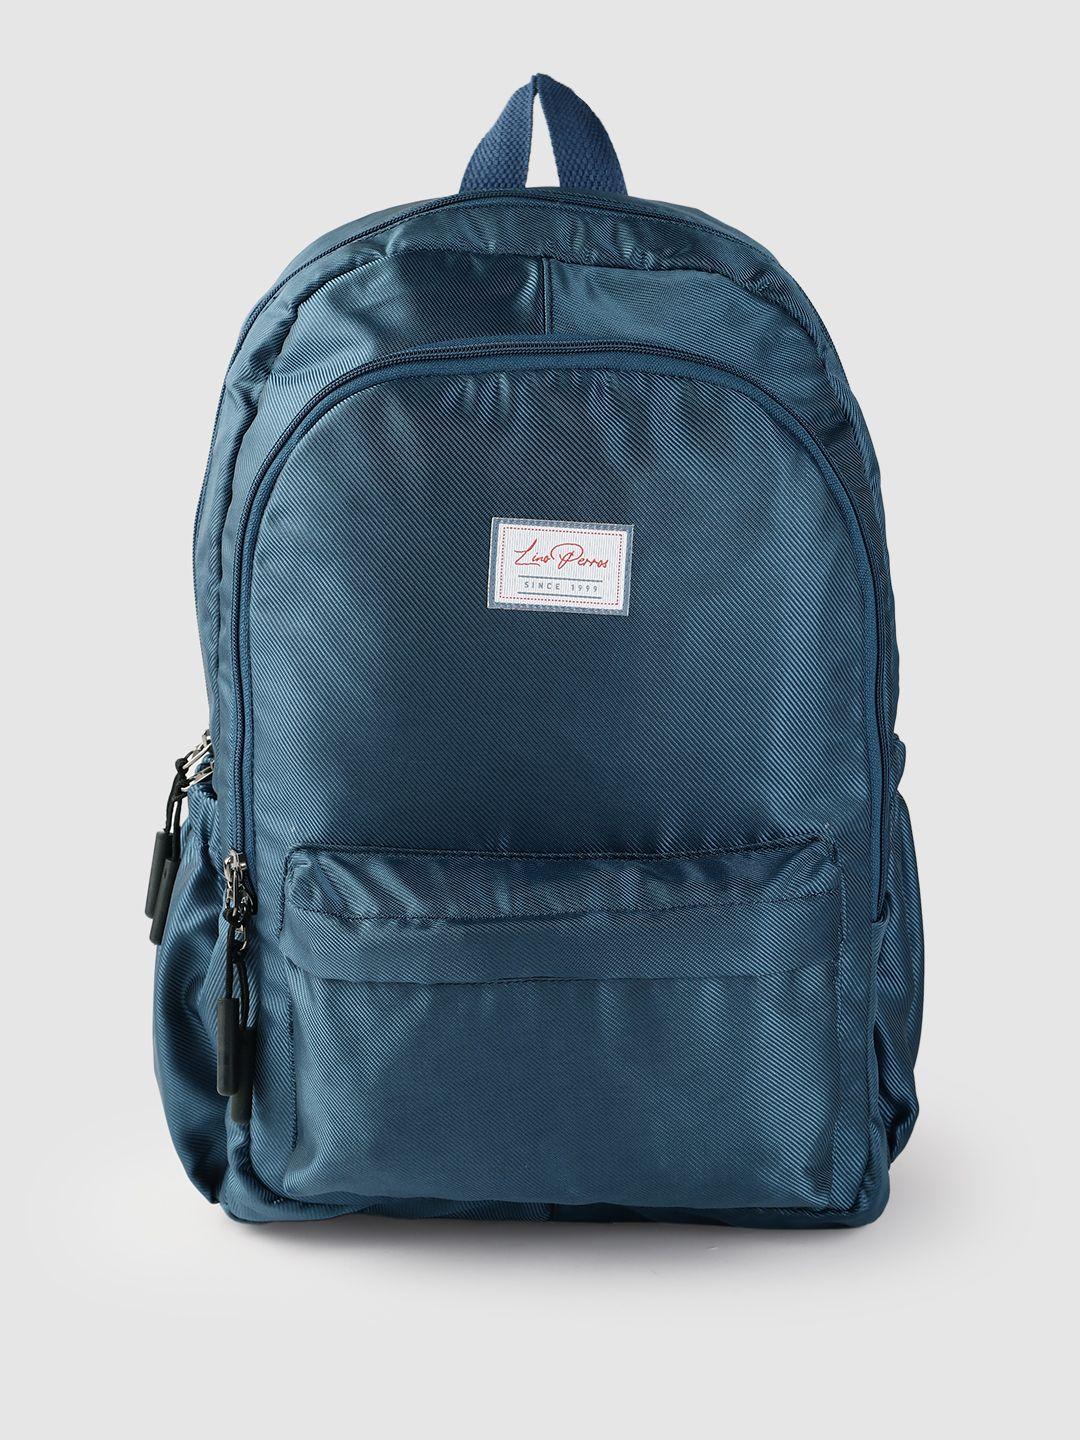 lino perros women teal blue solid backpack- 28 litres